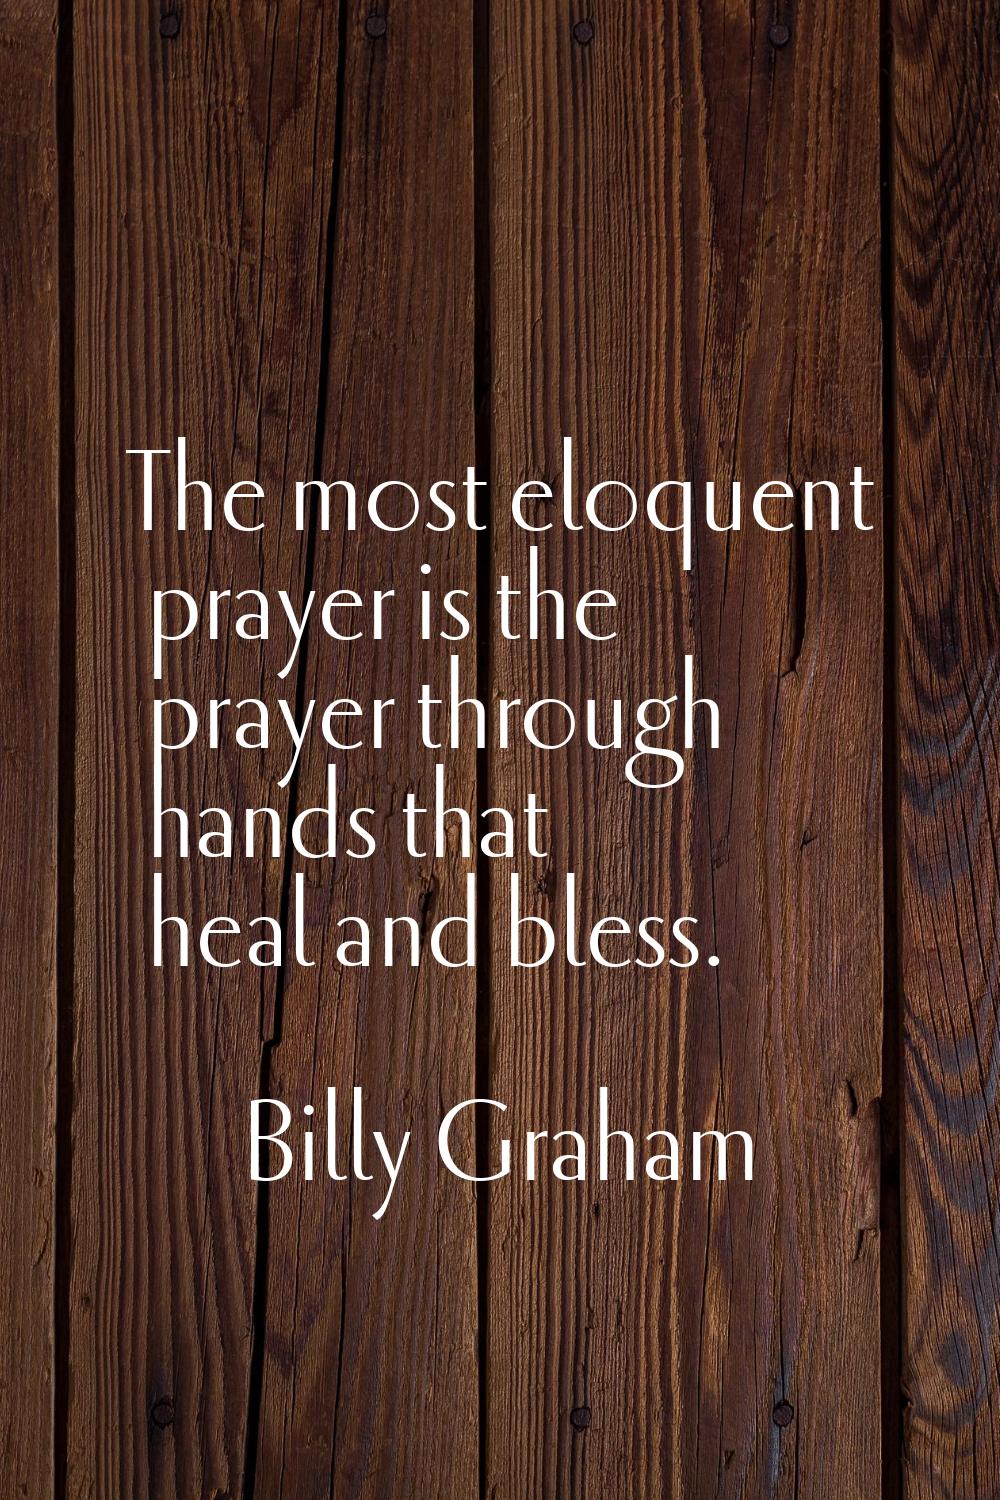 The most eloquent prayer is the prayer through hands that heal and bless.